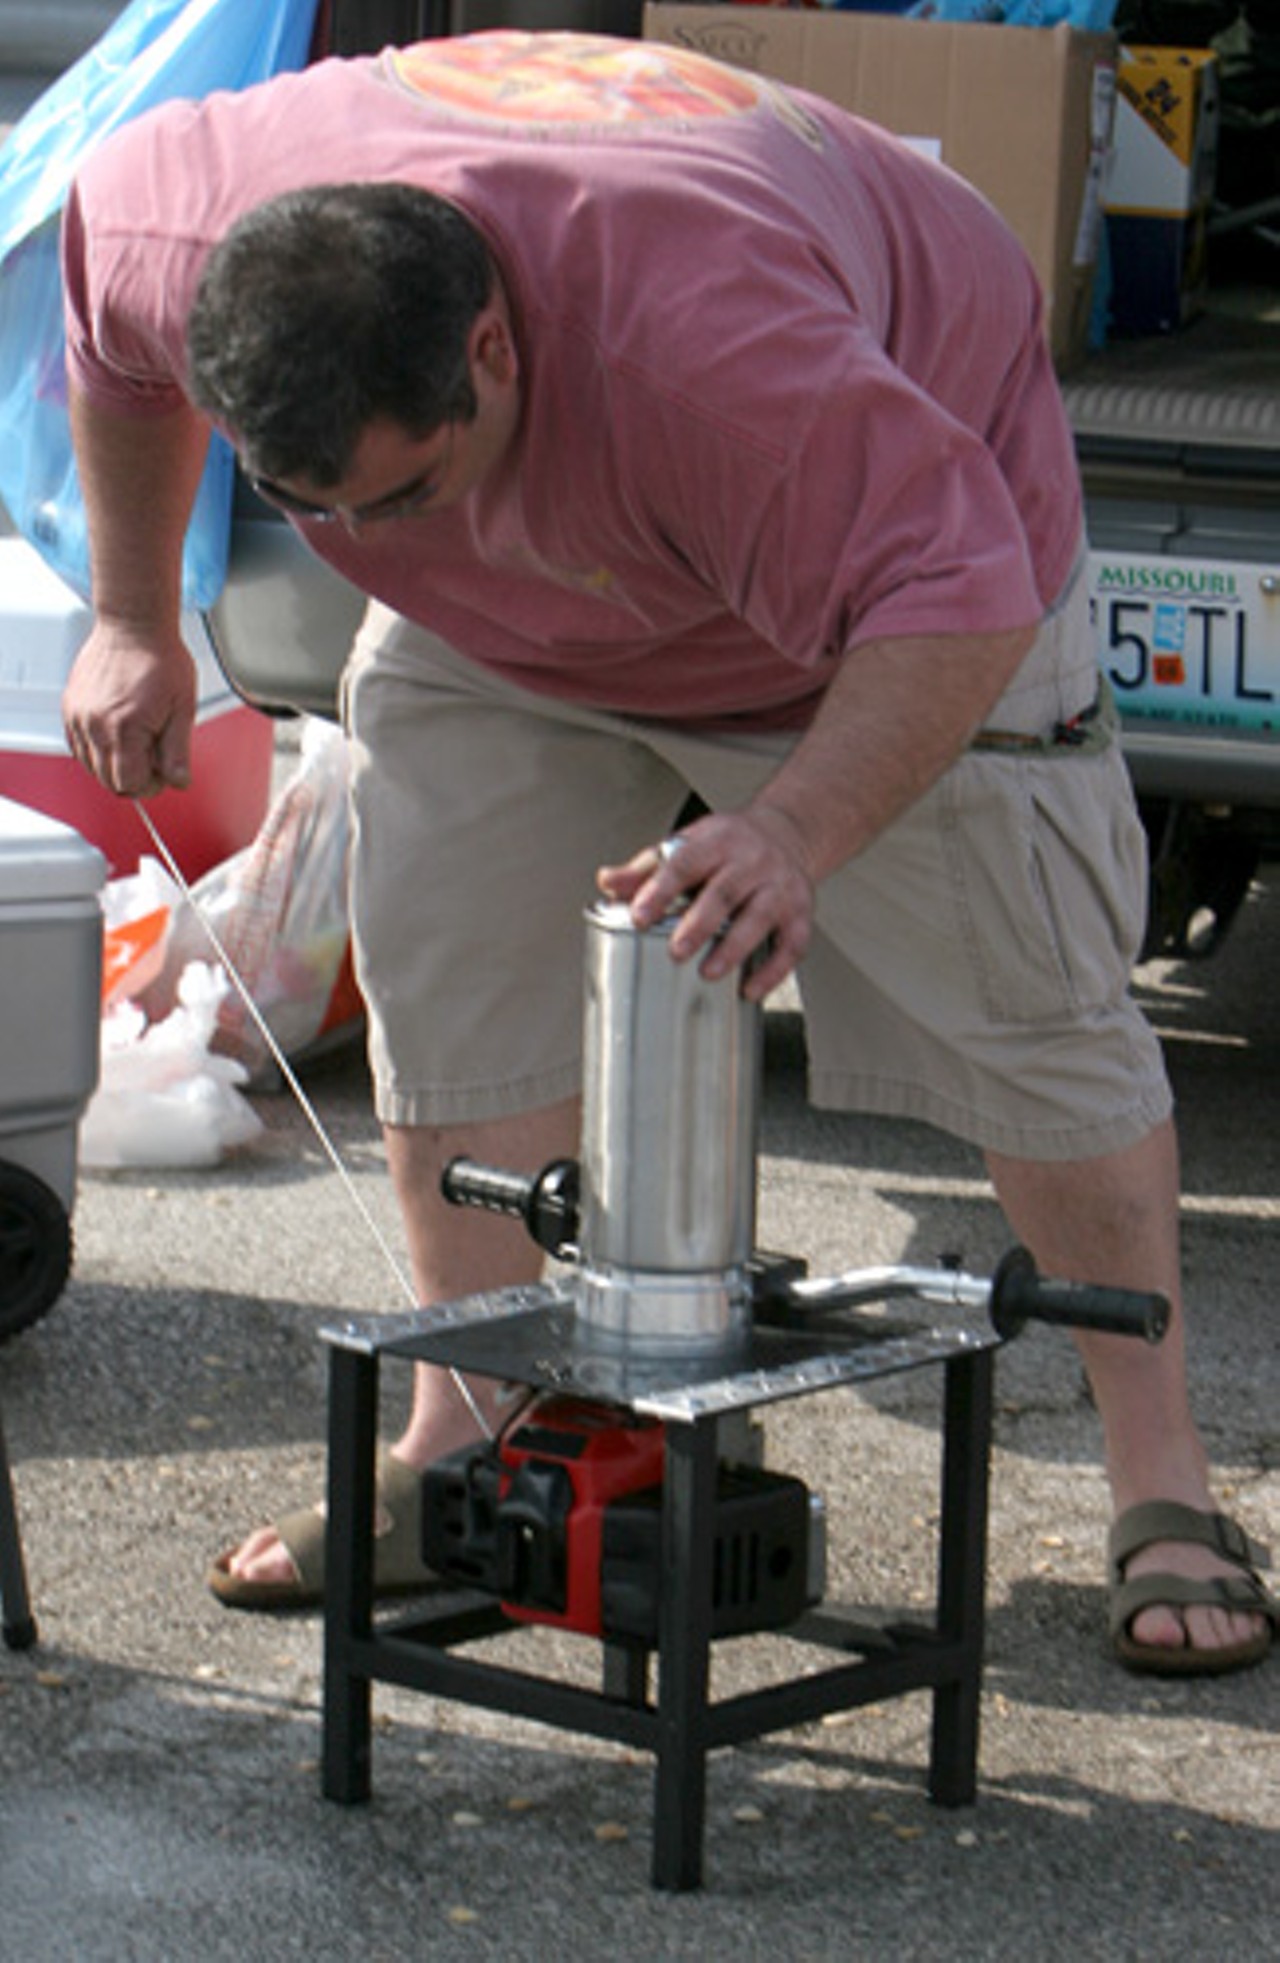 Kevin Zerr starts up his gas powered blender.